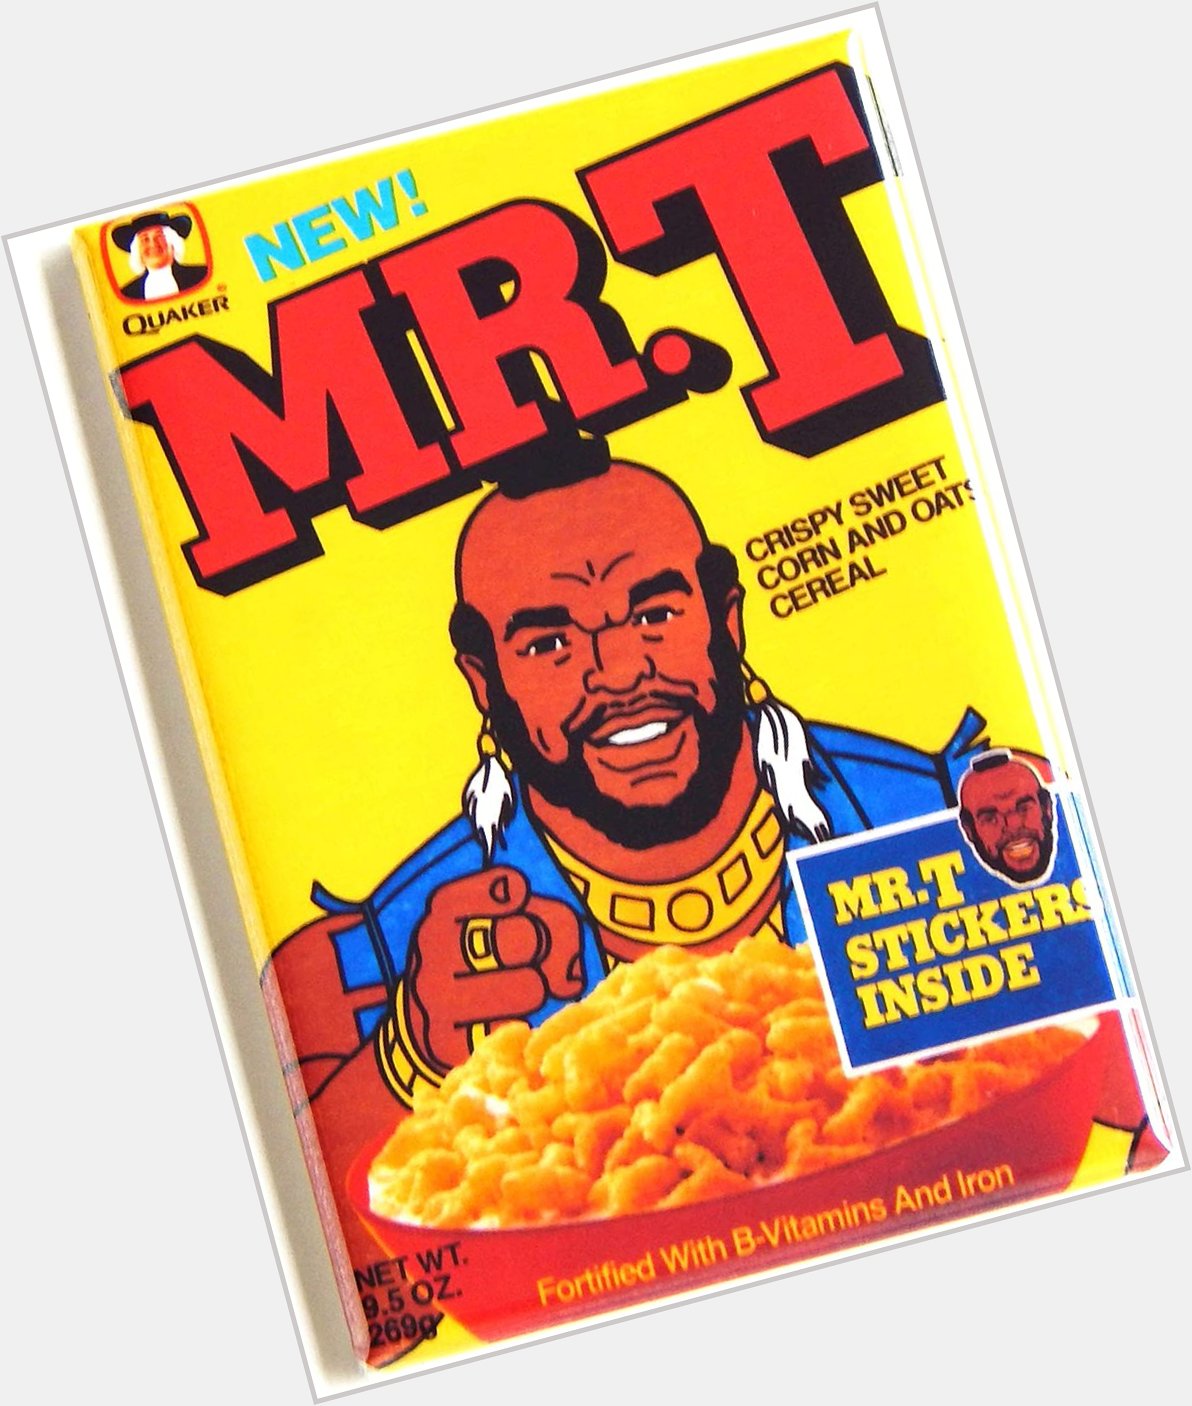  My closest encounter with Mr. T was with his cereal.  Happy Birthday Mr. T! 